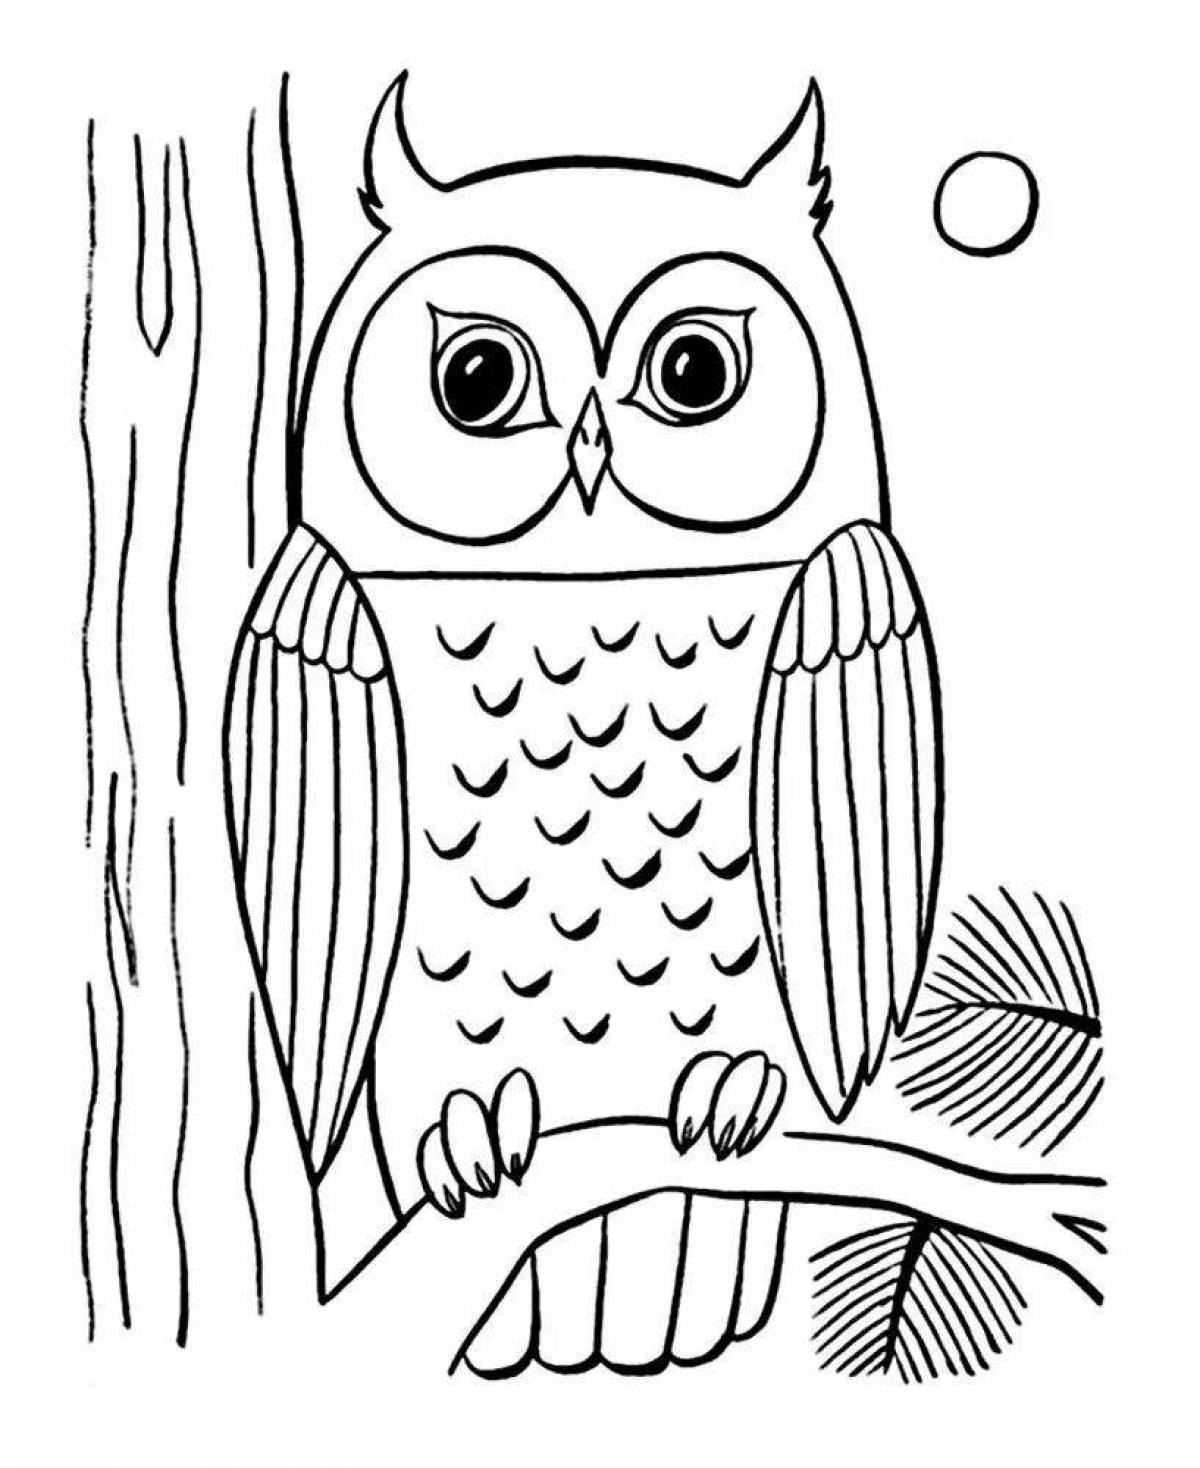 Coloring page graceful long-eared owl